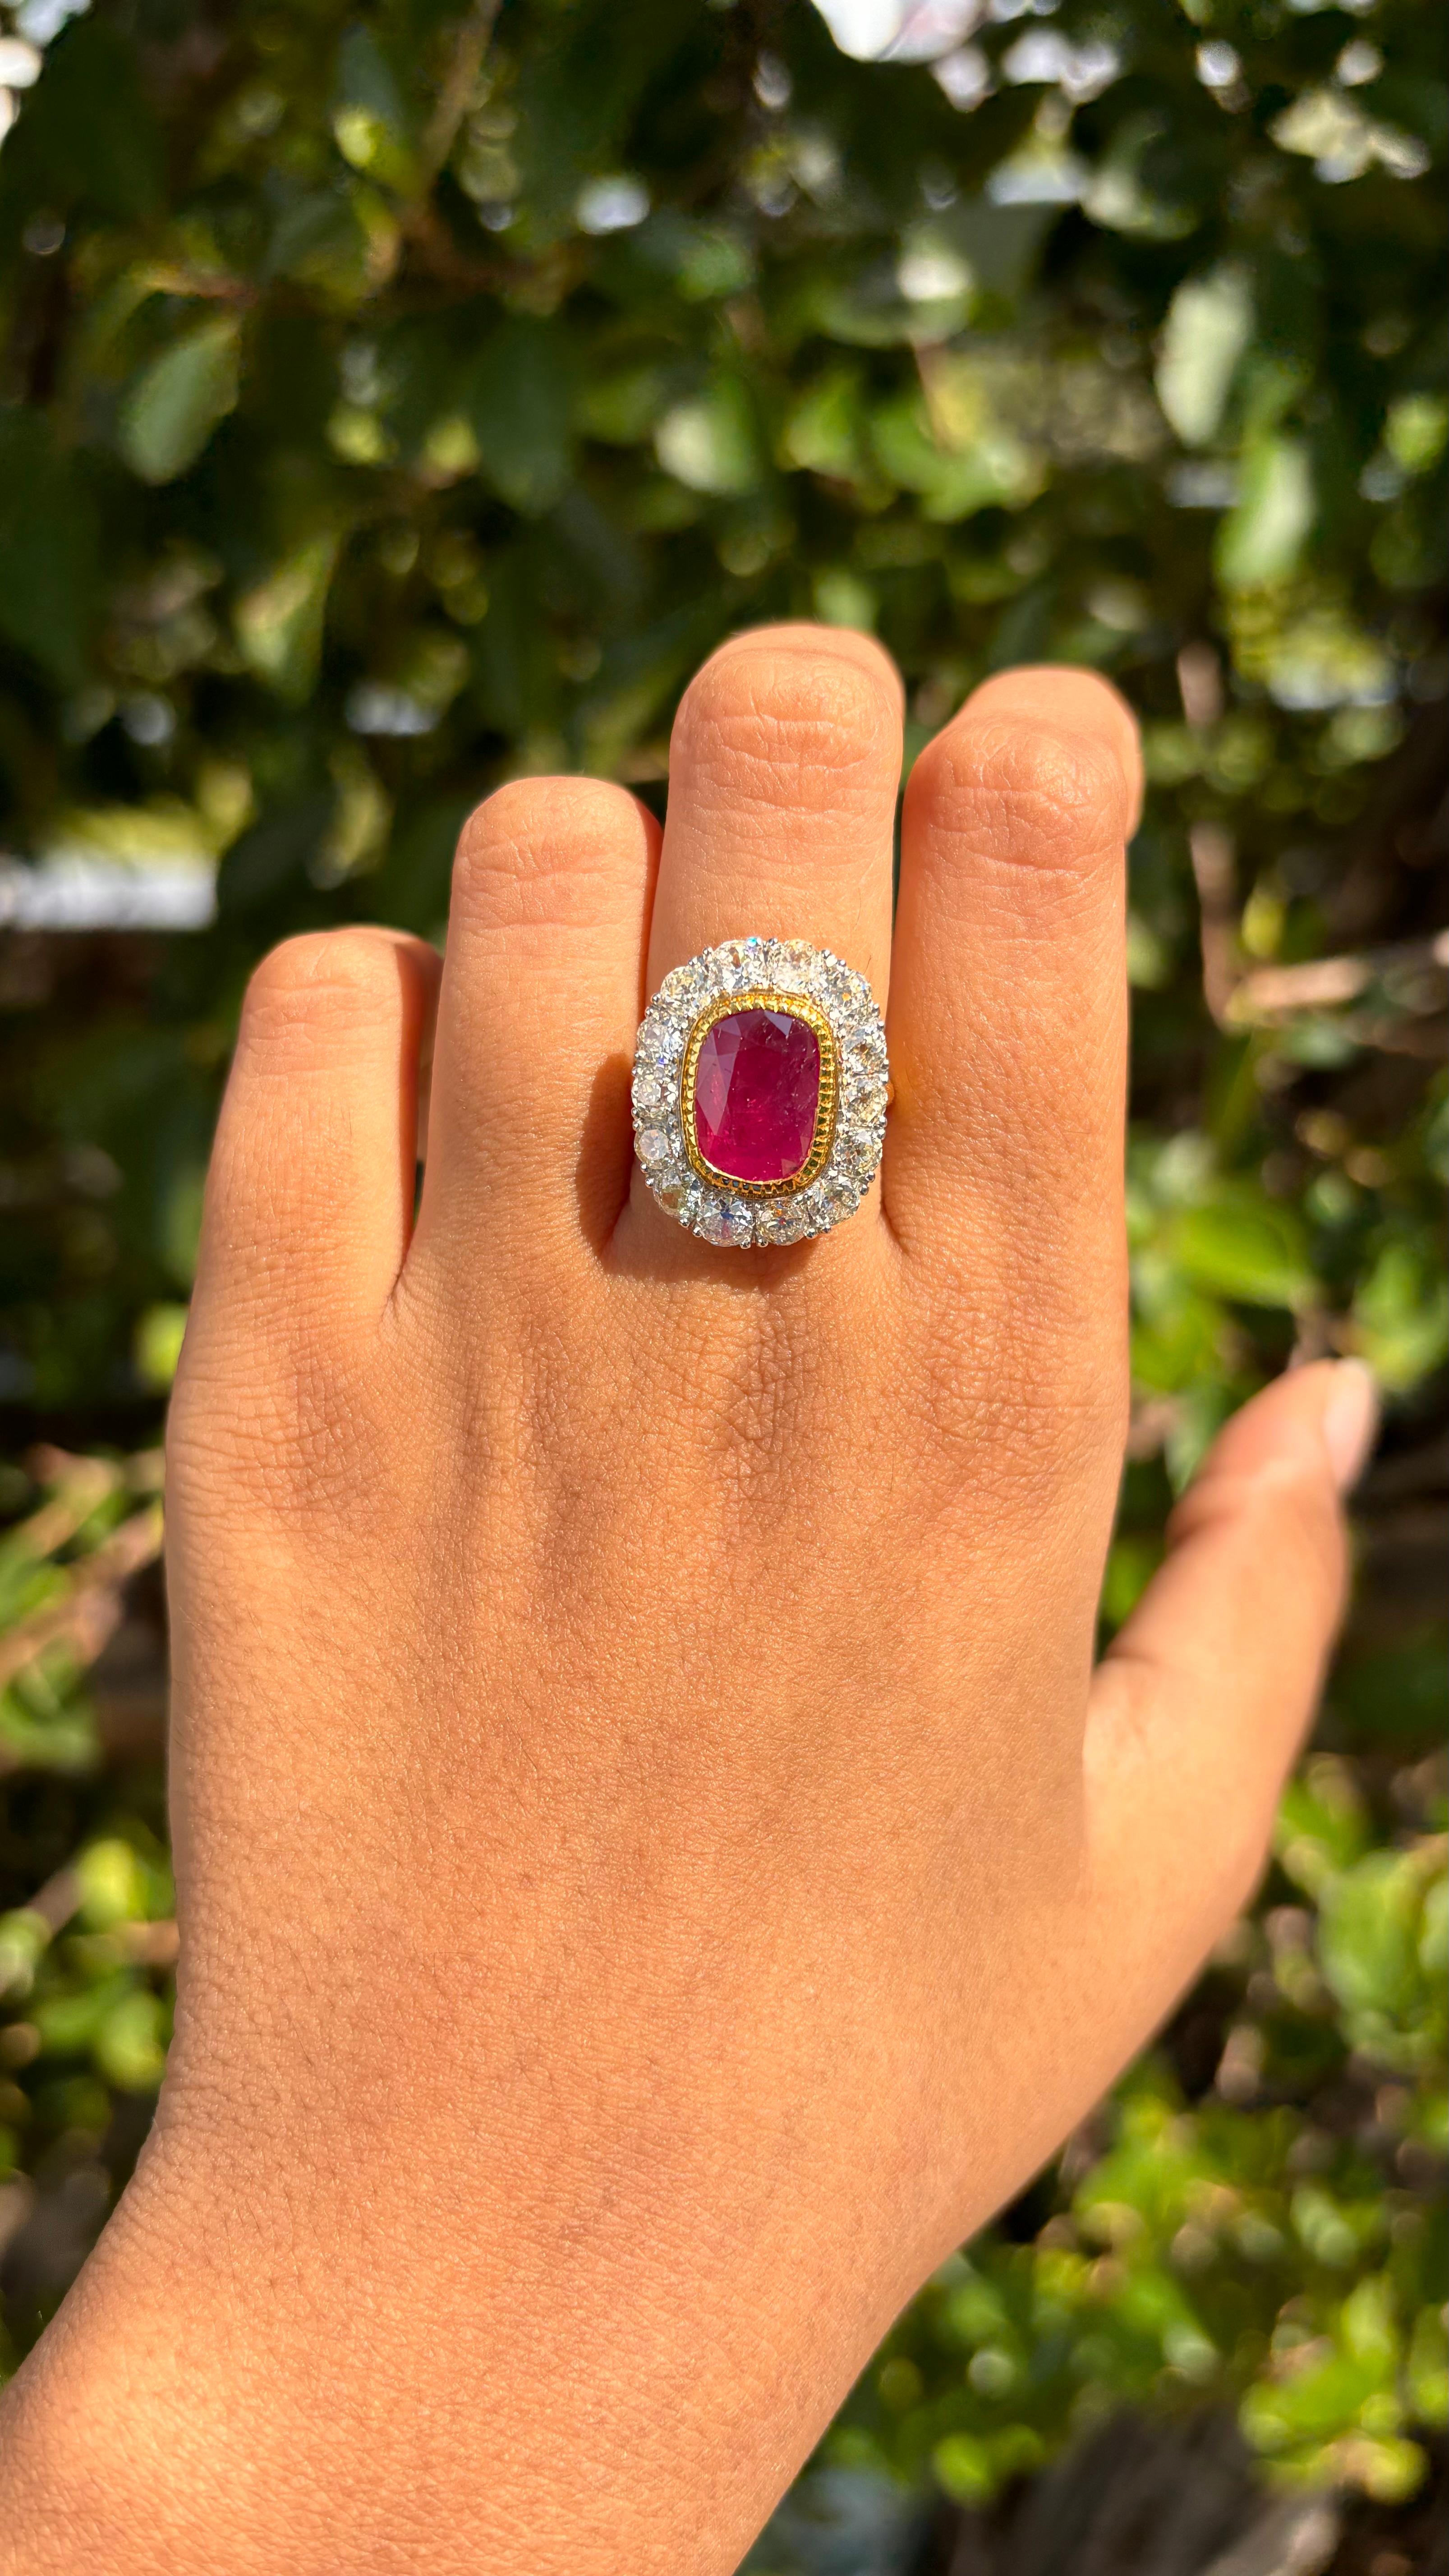 Cushion Cut Un-Heated Art Deco 4.35 Carat Ruby Ring with Authentic Old Cut Diamonds 18k Gold For Sale